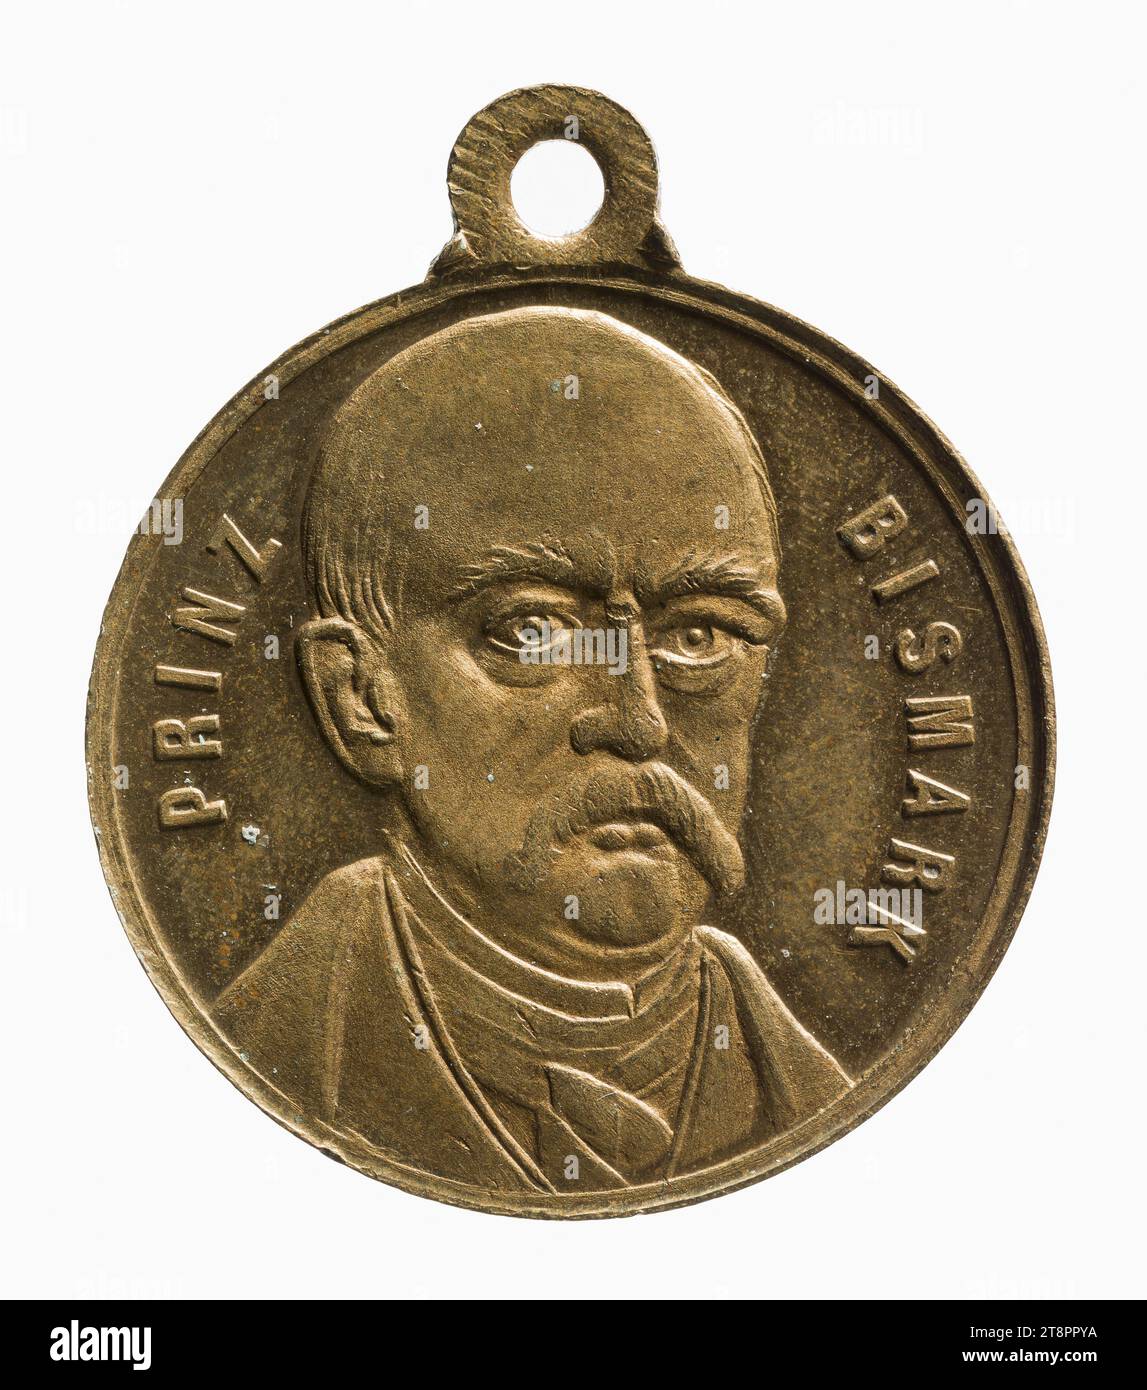 Adolphe Thiers, head of the executive power (1797-1877) and Otto von Bismark, Prussian and later German chancellor (1815-1898),1870-1871, Anonymous, Medal engraver, Between 1870 and 1871, 19th century, Numismatic, Medal, Brass, Sizes - Work: Diameter: 2.4 cm, Weight (type size): 6.22 g Stock Photo